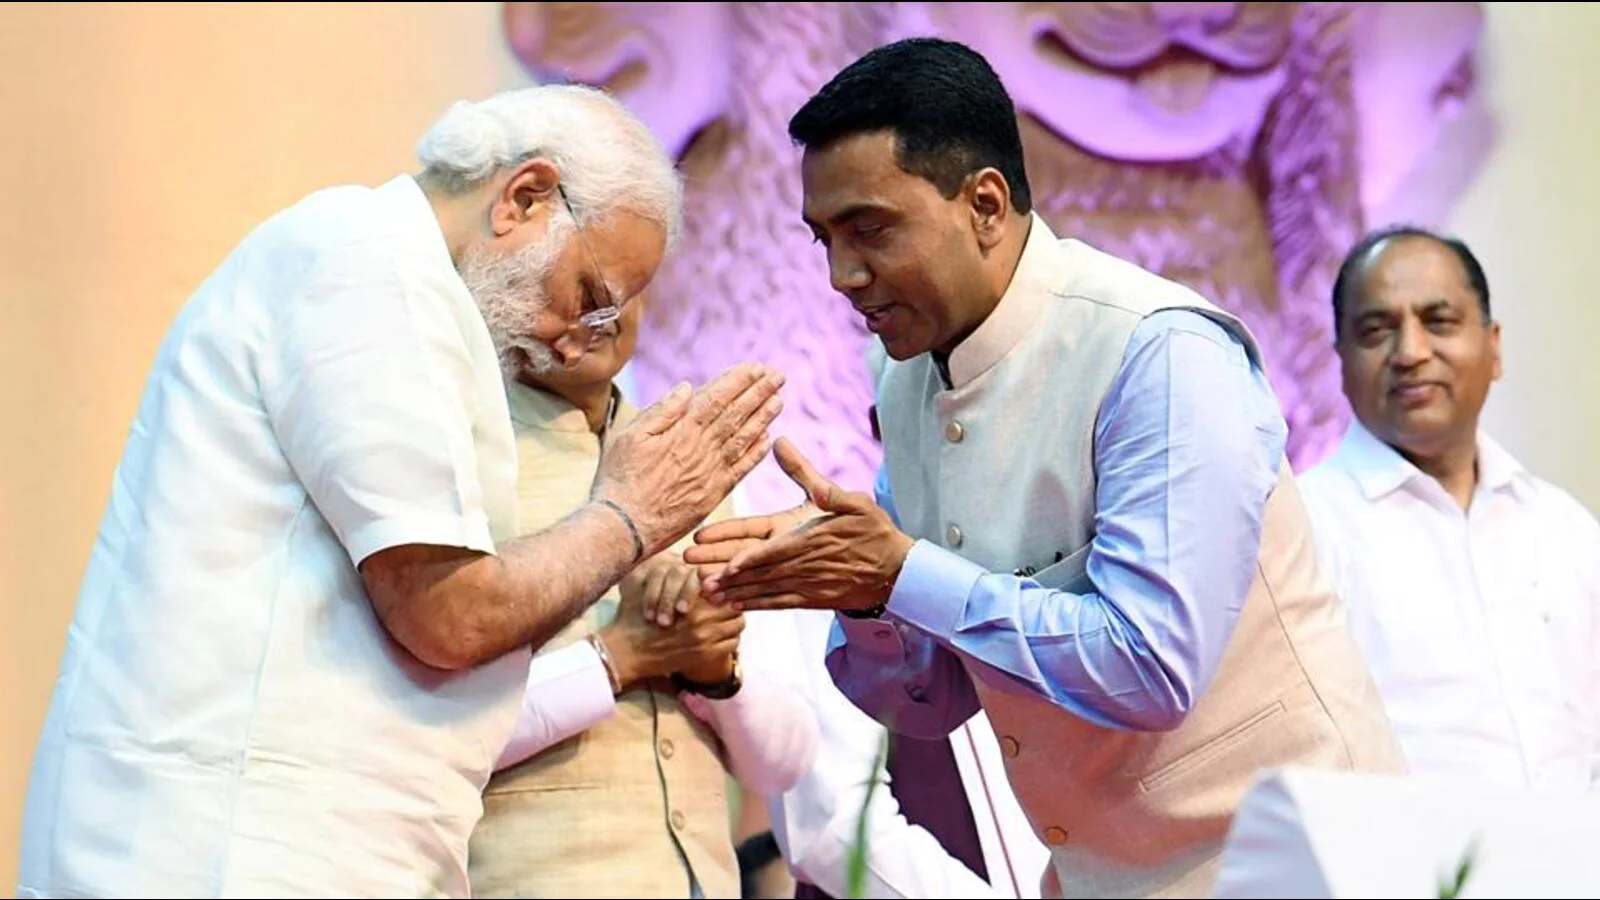 Pramod Sawant sworn in as Goa CM; 8 ministers, all from BJP, make up cabinet